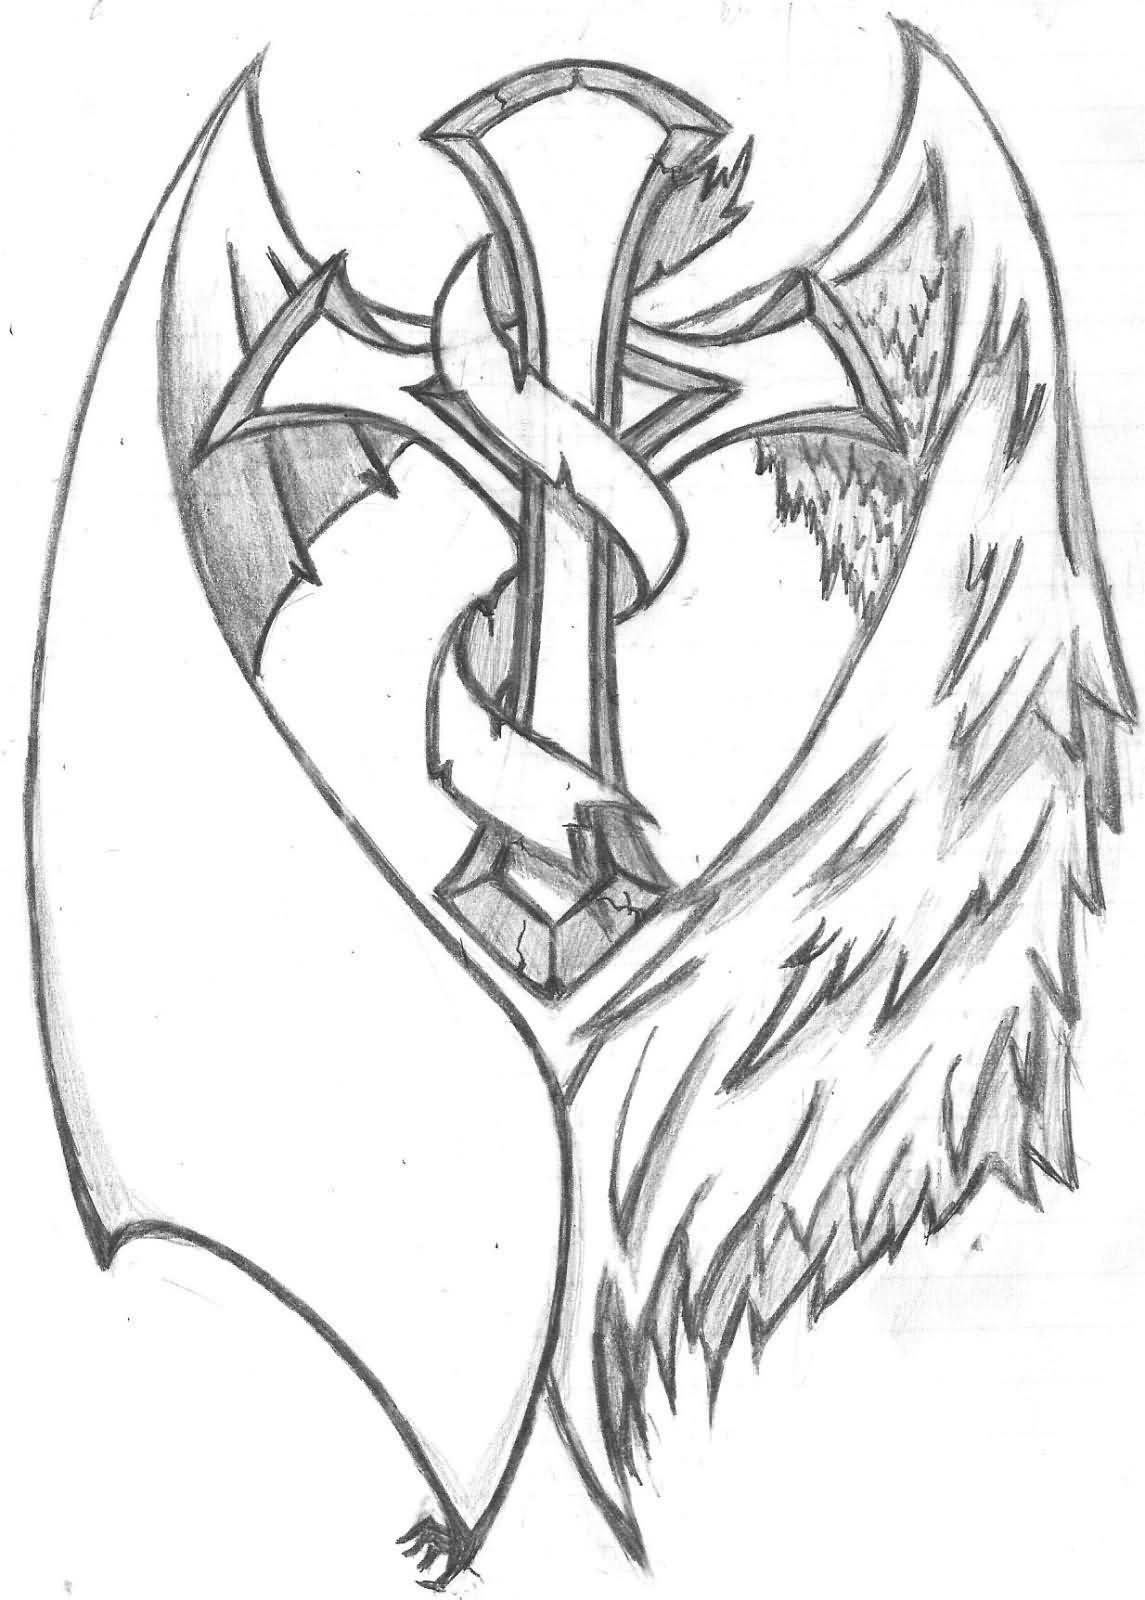 Black And Grey Cross With Wings Tattoo Design Streadwelljr inside measurements 1145 X 1600